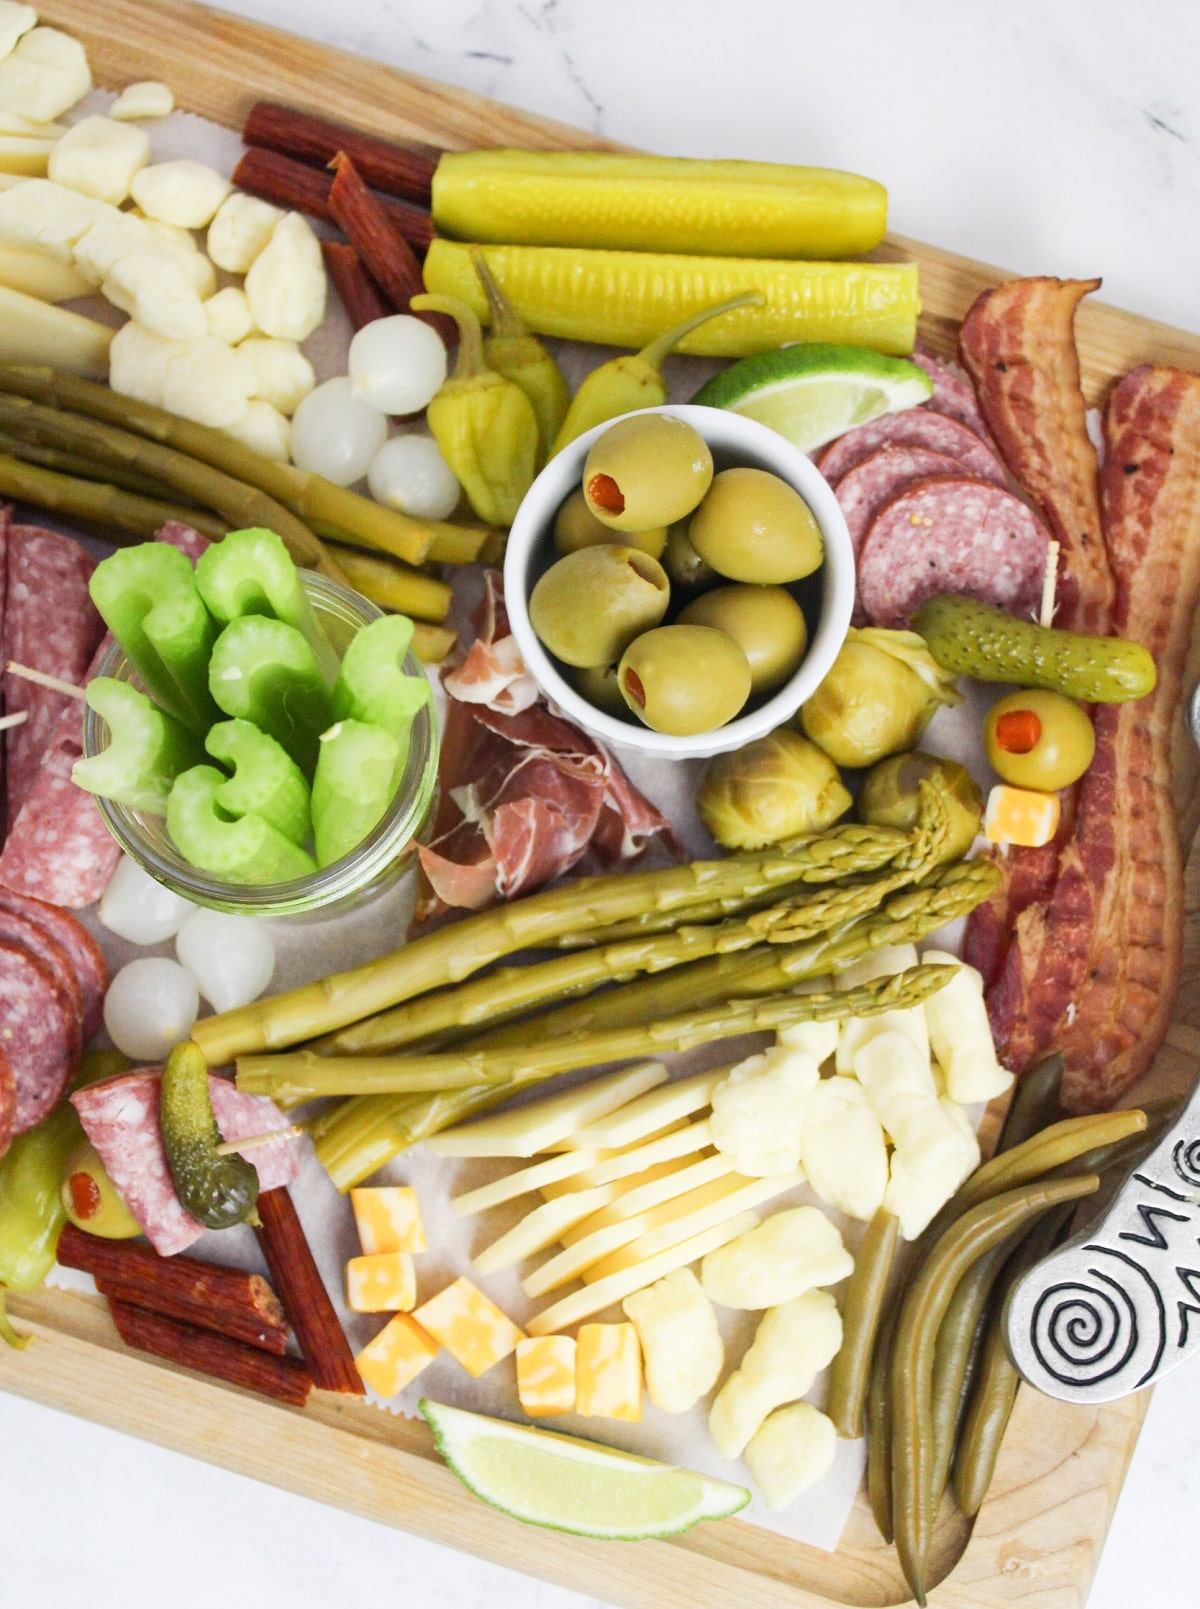 Overhead view of a completed board. The toppings are a variety of meats, cheeses, pickles, olives, pepper, vegetables.